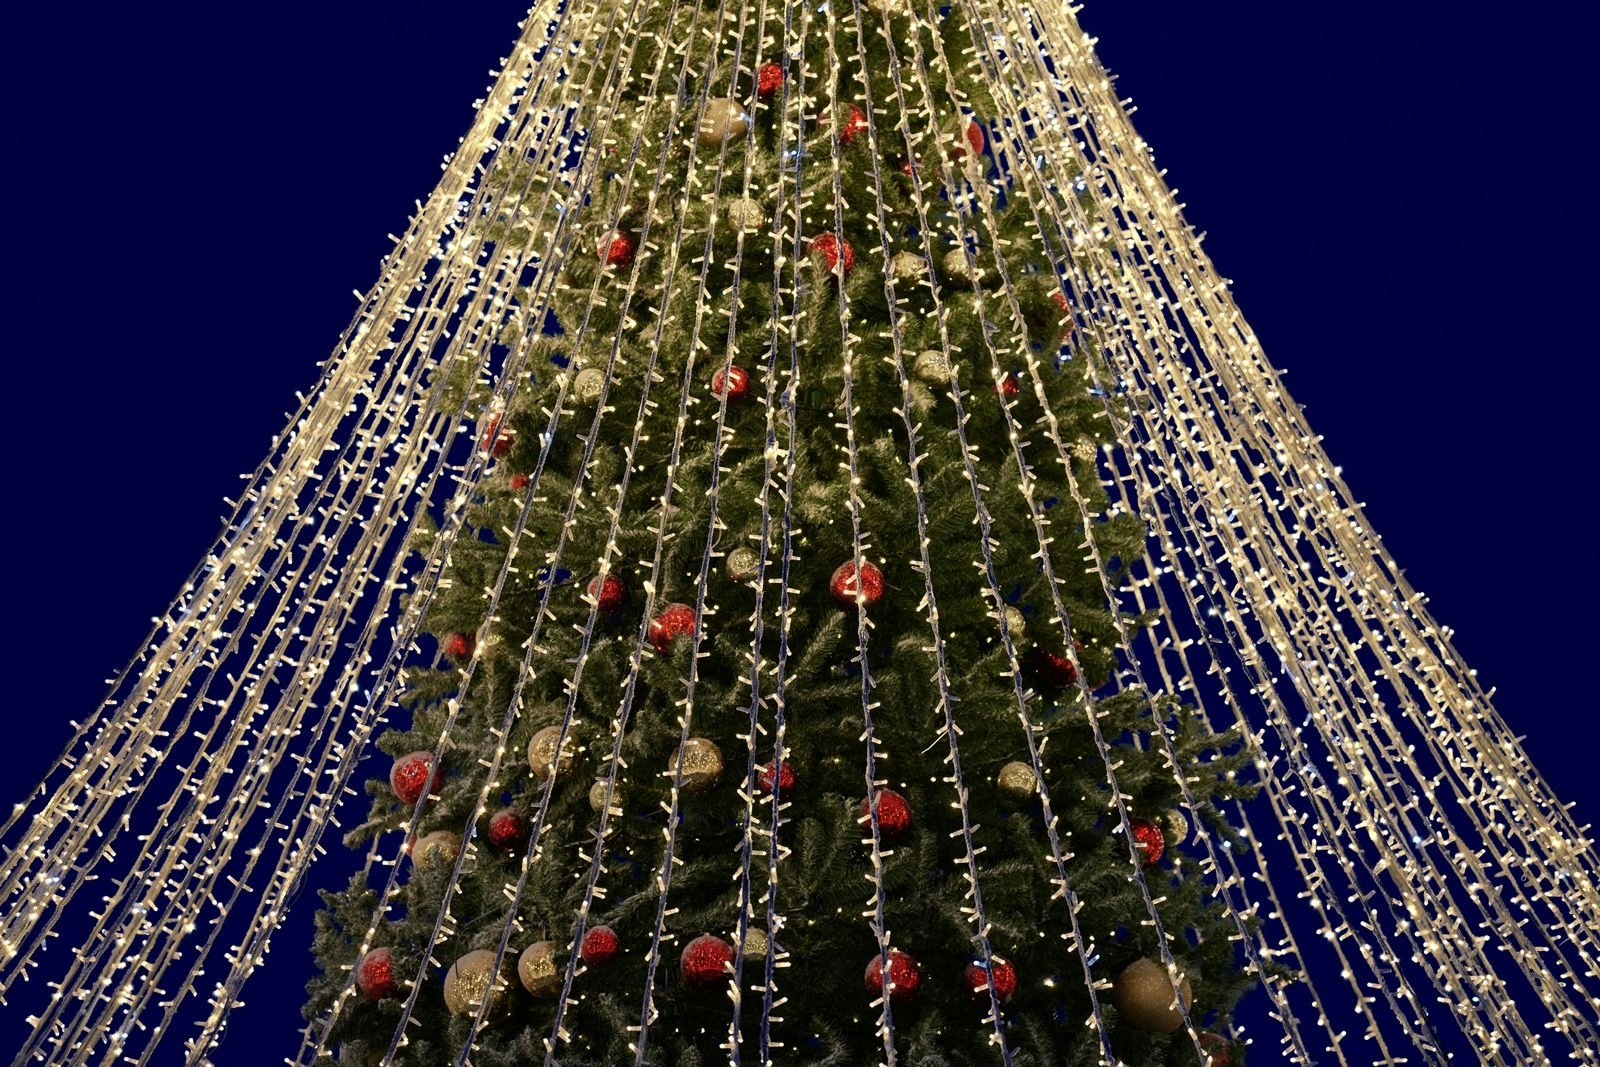 CLose up of a Christmas tree decorated with baubles and with garlands of lights